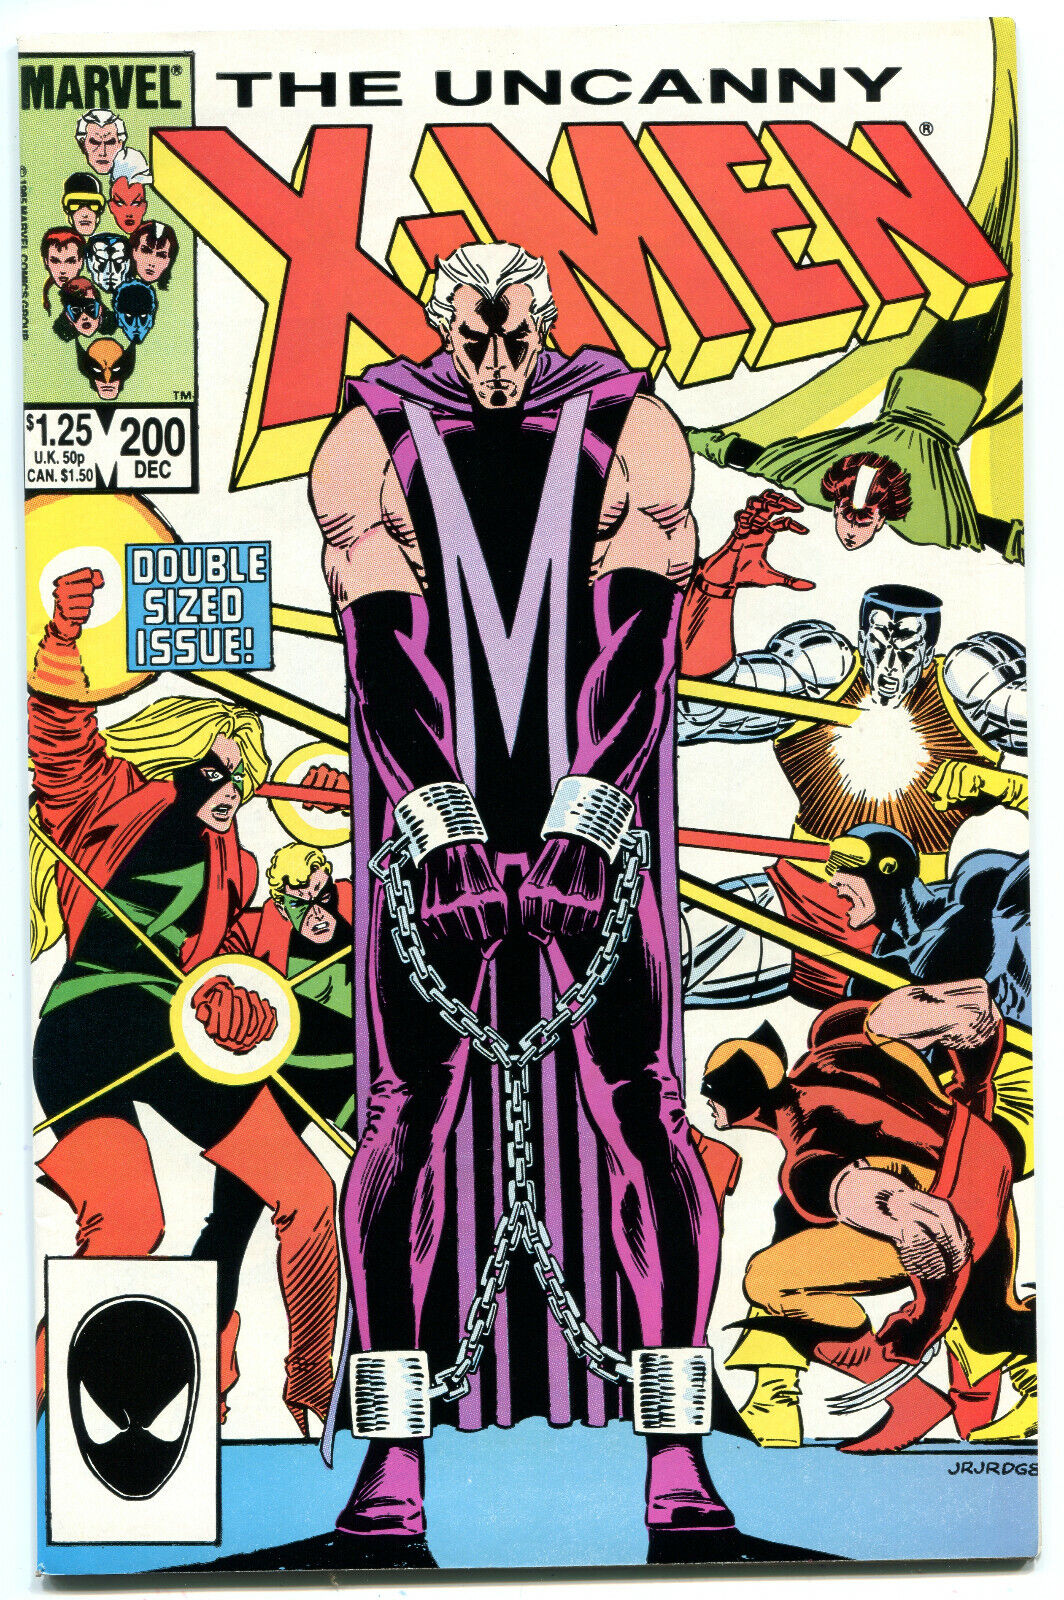 The Uncanny X-Men #200 (1985) - WILL COMBINE SHIPPING